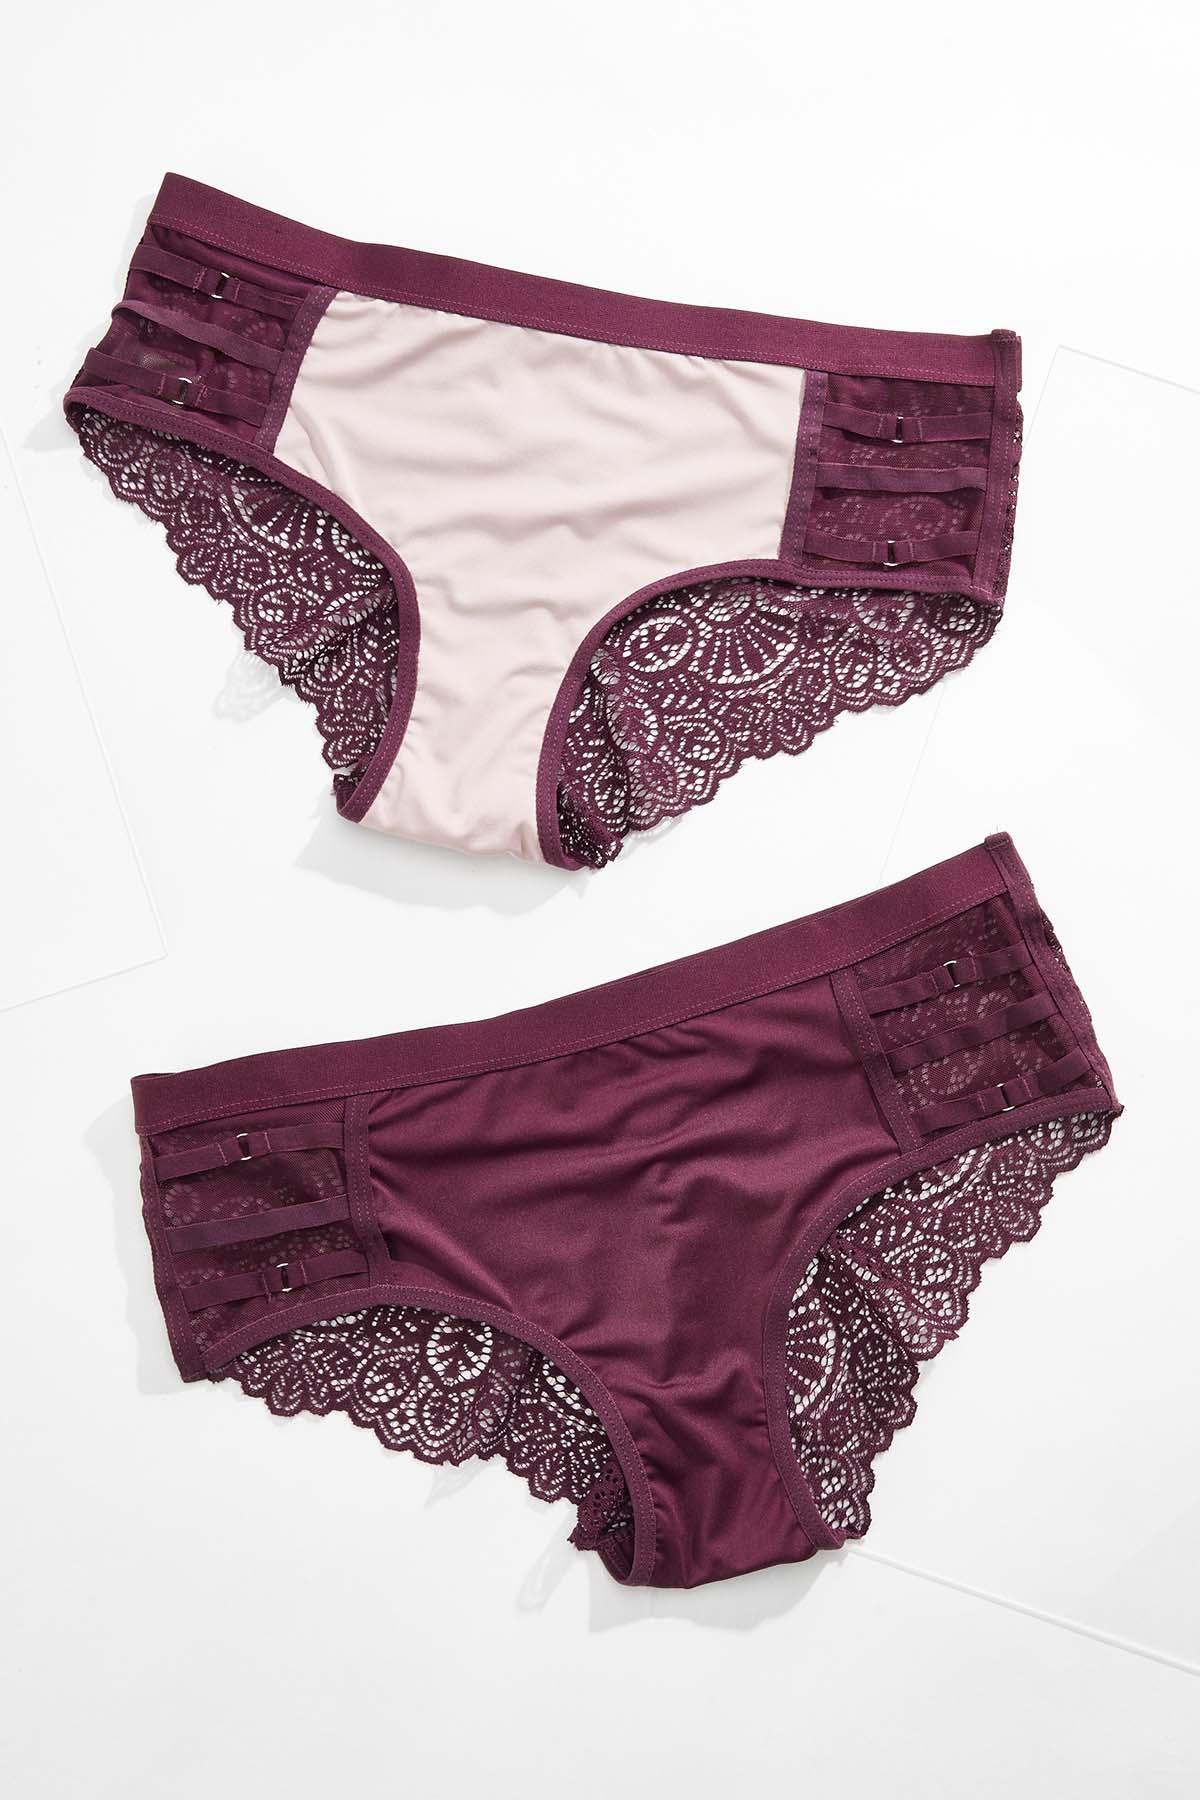 Lacy Plum Hipster Panty Set